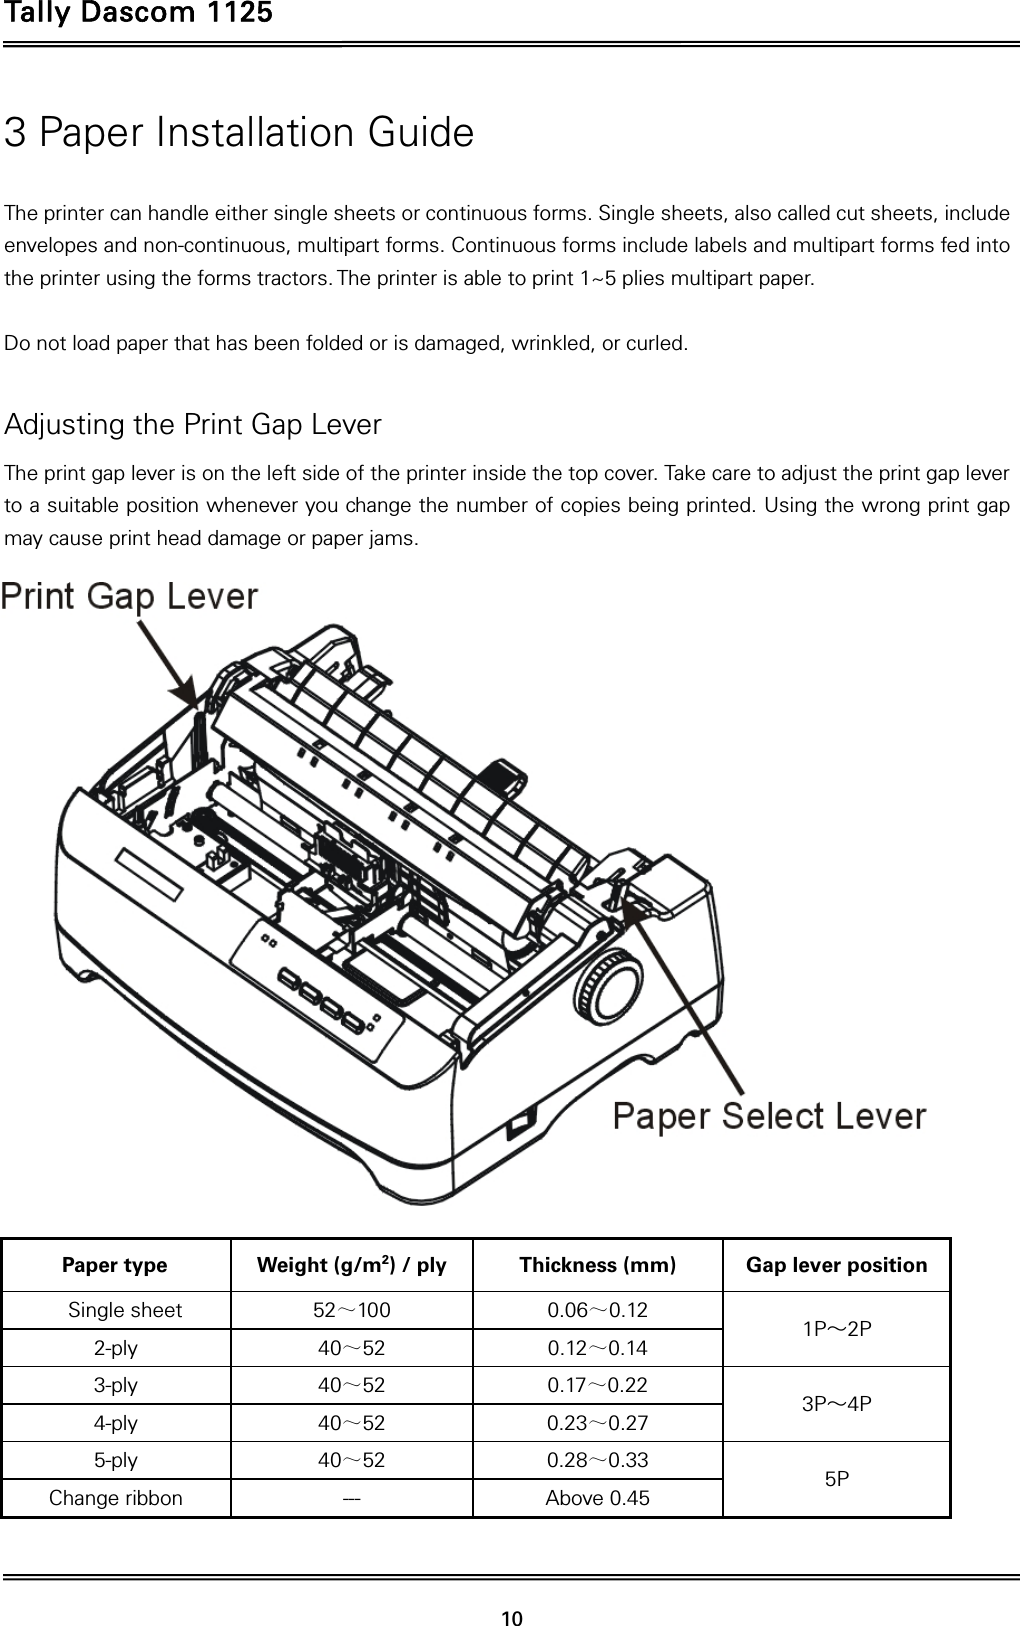 Tally Dascom 1125   10  3 Paper Installation Guide  The printer can handle either single sheets or continuous forms. Single sheets, also called cut sheets, include envelopes and non-continuous, multipart forms. Continuous forms include labels and multipart forms fed into the printer using the forms tractors. The printer is able to print 1~5 plies multipart paper.  Do not load paper that has been folded or is damaged, wrinkled, or curled.  Adjusting the Print Gap Lever The print gap lever is on the left side of the printer inside the top cover. Take care to adjust the print gap lever to a suitable position whenever you change the number of copies being printed. Using the wrong print gap may cause print head damage or paper jams.                      Paper type  Weight (g/m2) / ply  Thickness (mm)  Gap lever position Single sheet  52～100 0.06～0.12  1P～2P 2-ply  40～52 0.12～0.14 3-ply  40～52 0.17～0.22  3P～4P 4-ply  40～52 0.23～0.27 5-ply  40～52 0.28～0.33  5P Change ribbon  ---  Above 0.45  